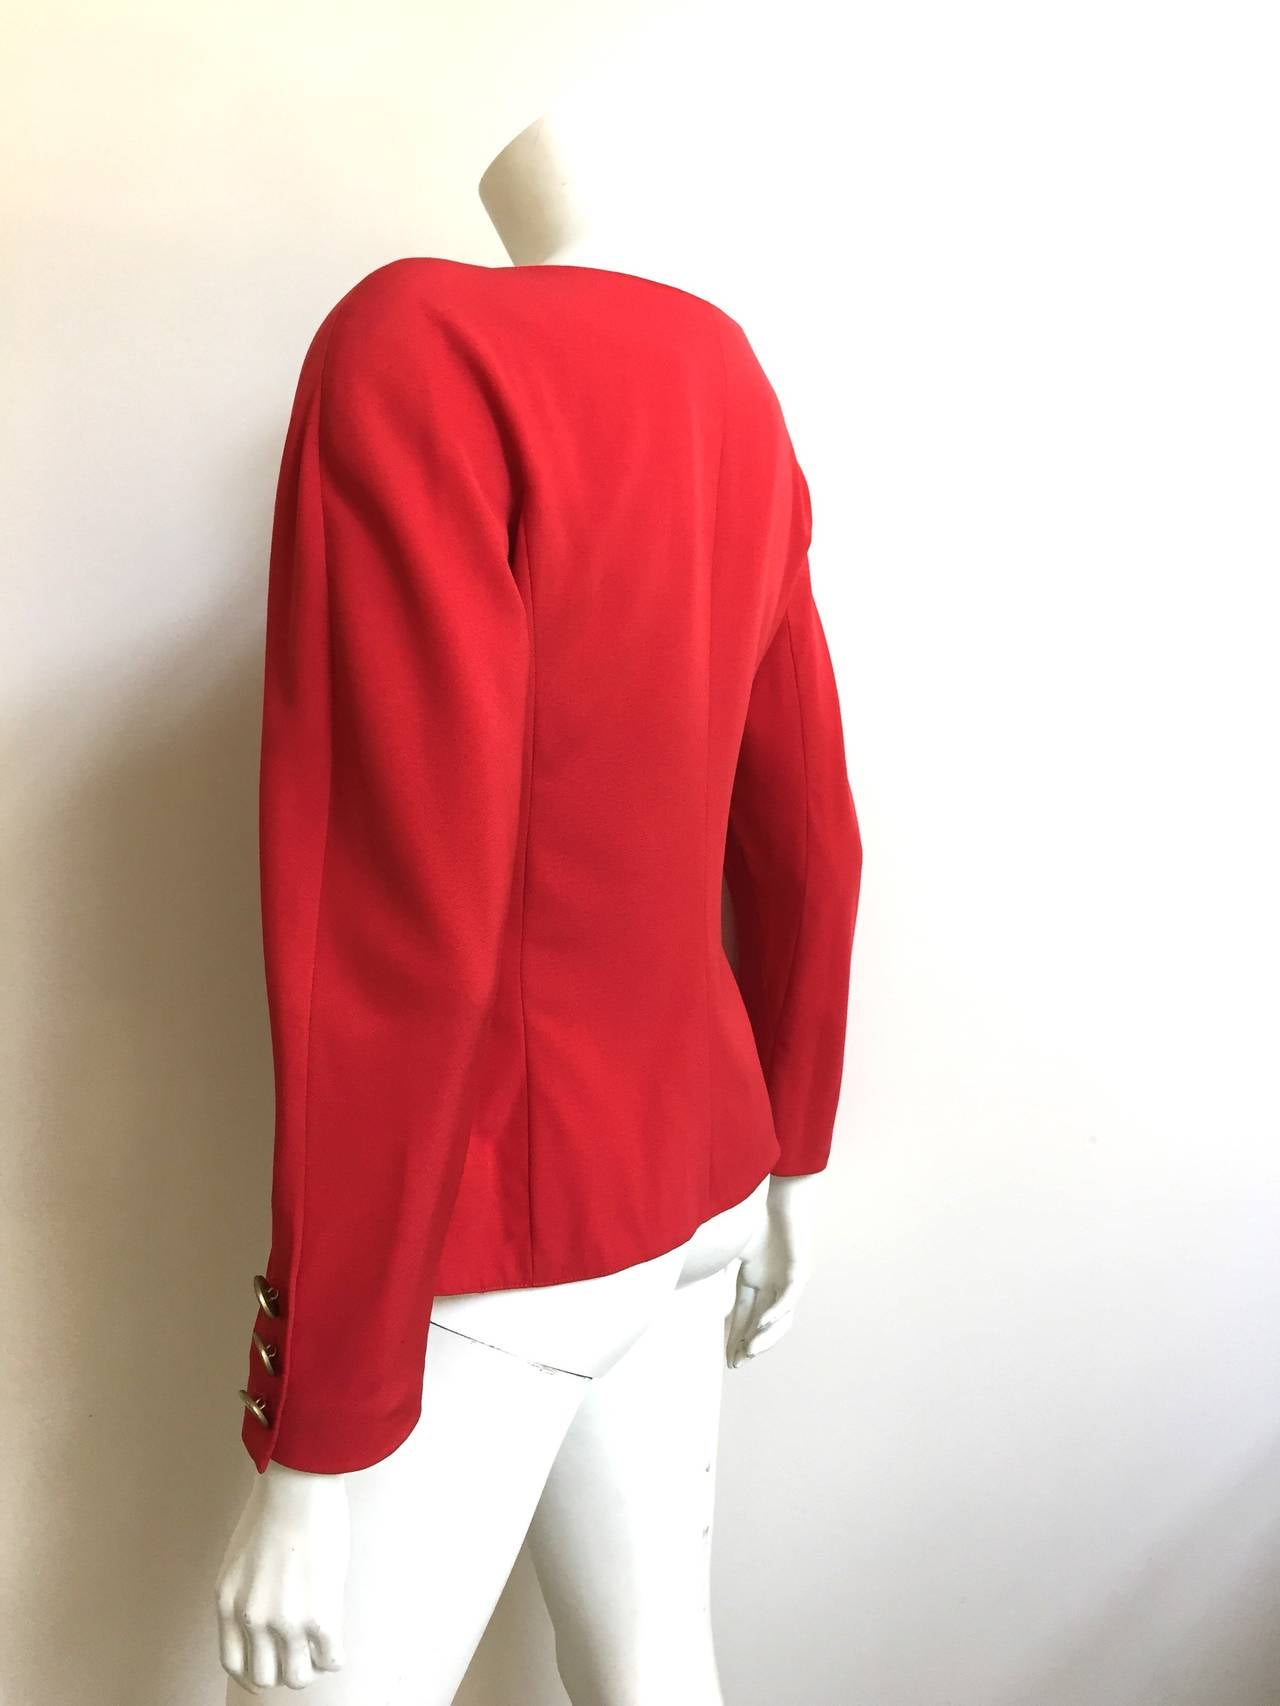 Jacques Molko 1980s Red Woven Wool Jacket Size 6. For Sale 1